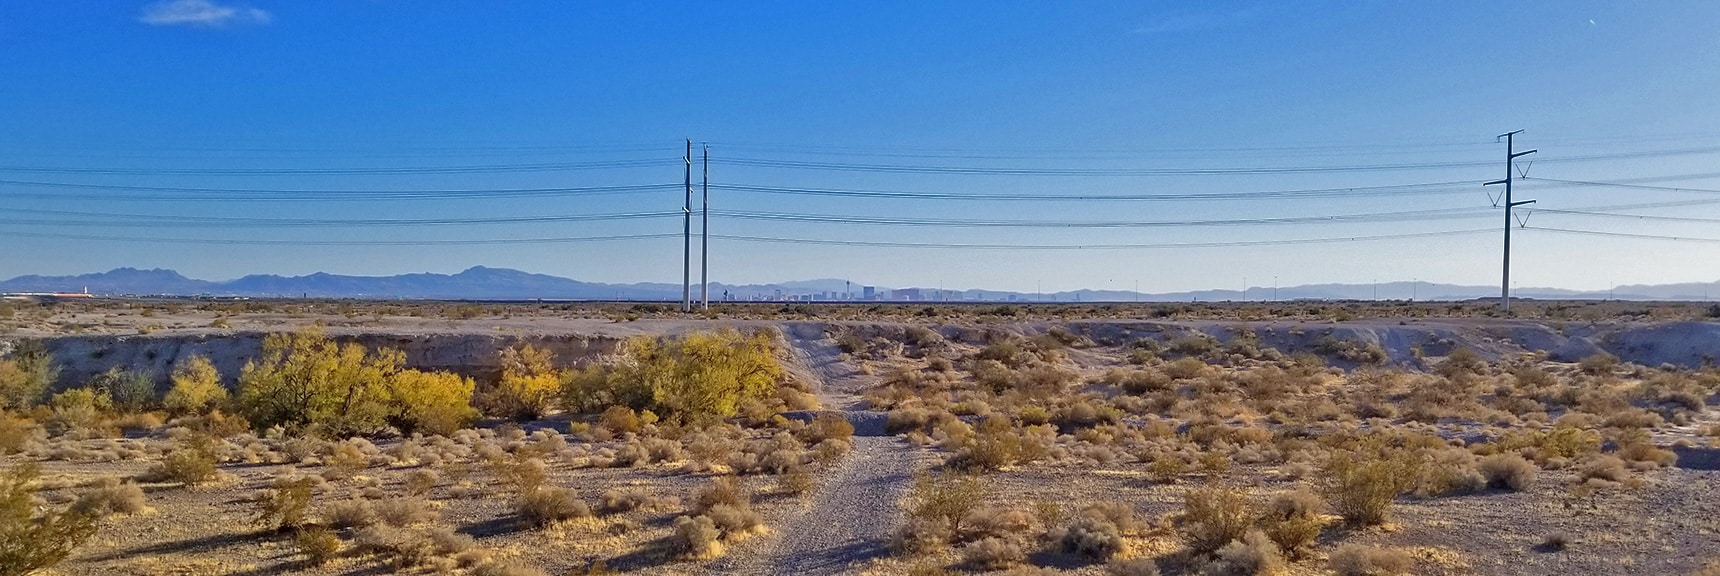 Power Lines. Turn Right on Maintenance Road Which Will Become Grand Teton Road in Centennial Hills Area | Gass Peak Road Circuit | Desert National Wildlife Refuge | Nevada